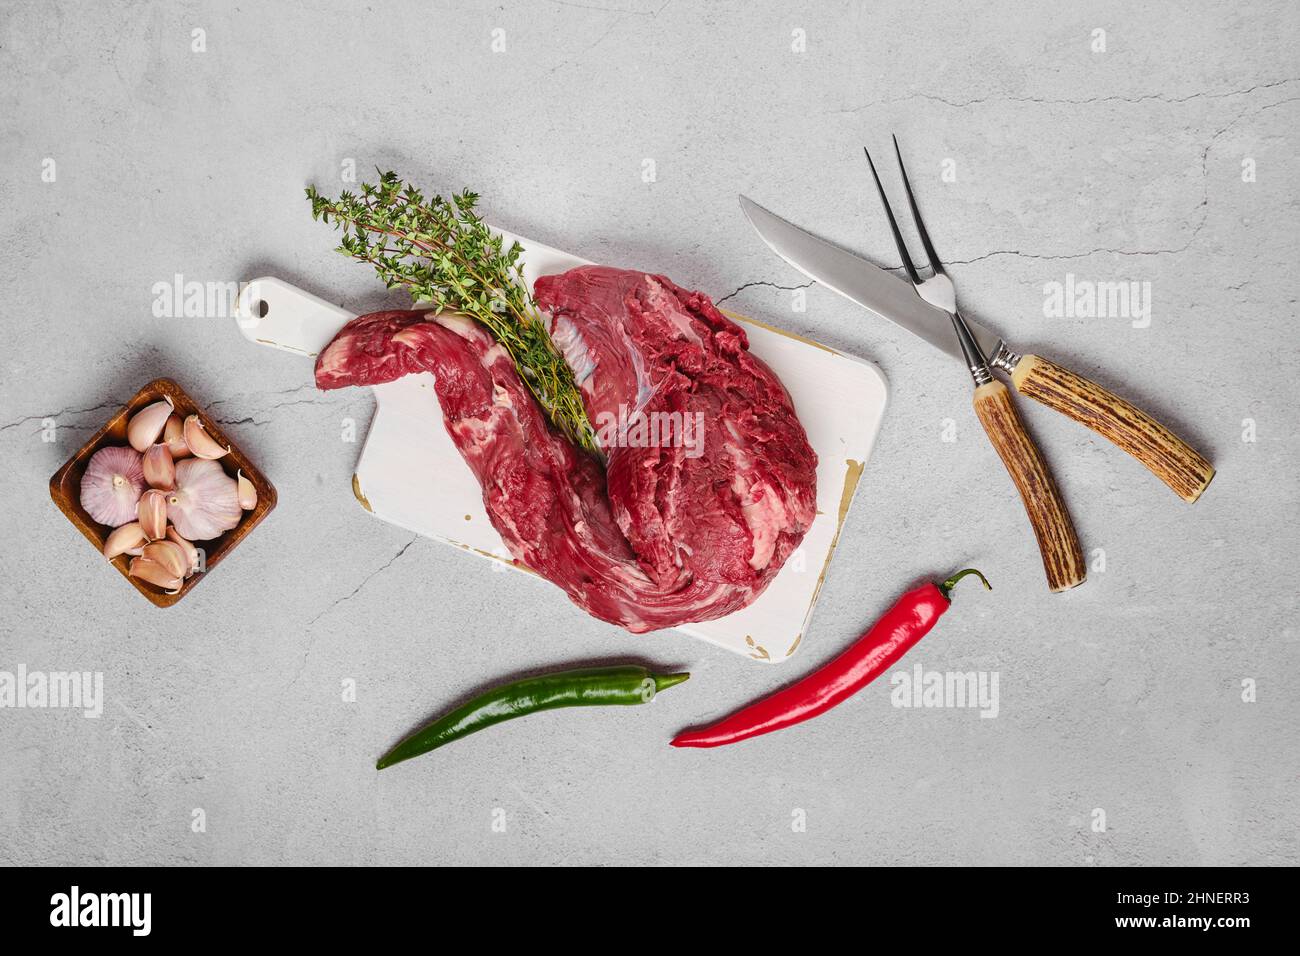 Raw beef whole tenderloin with herbs and spice on concrete background Stock Photo